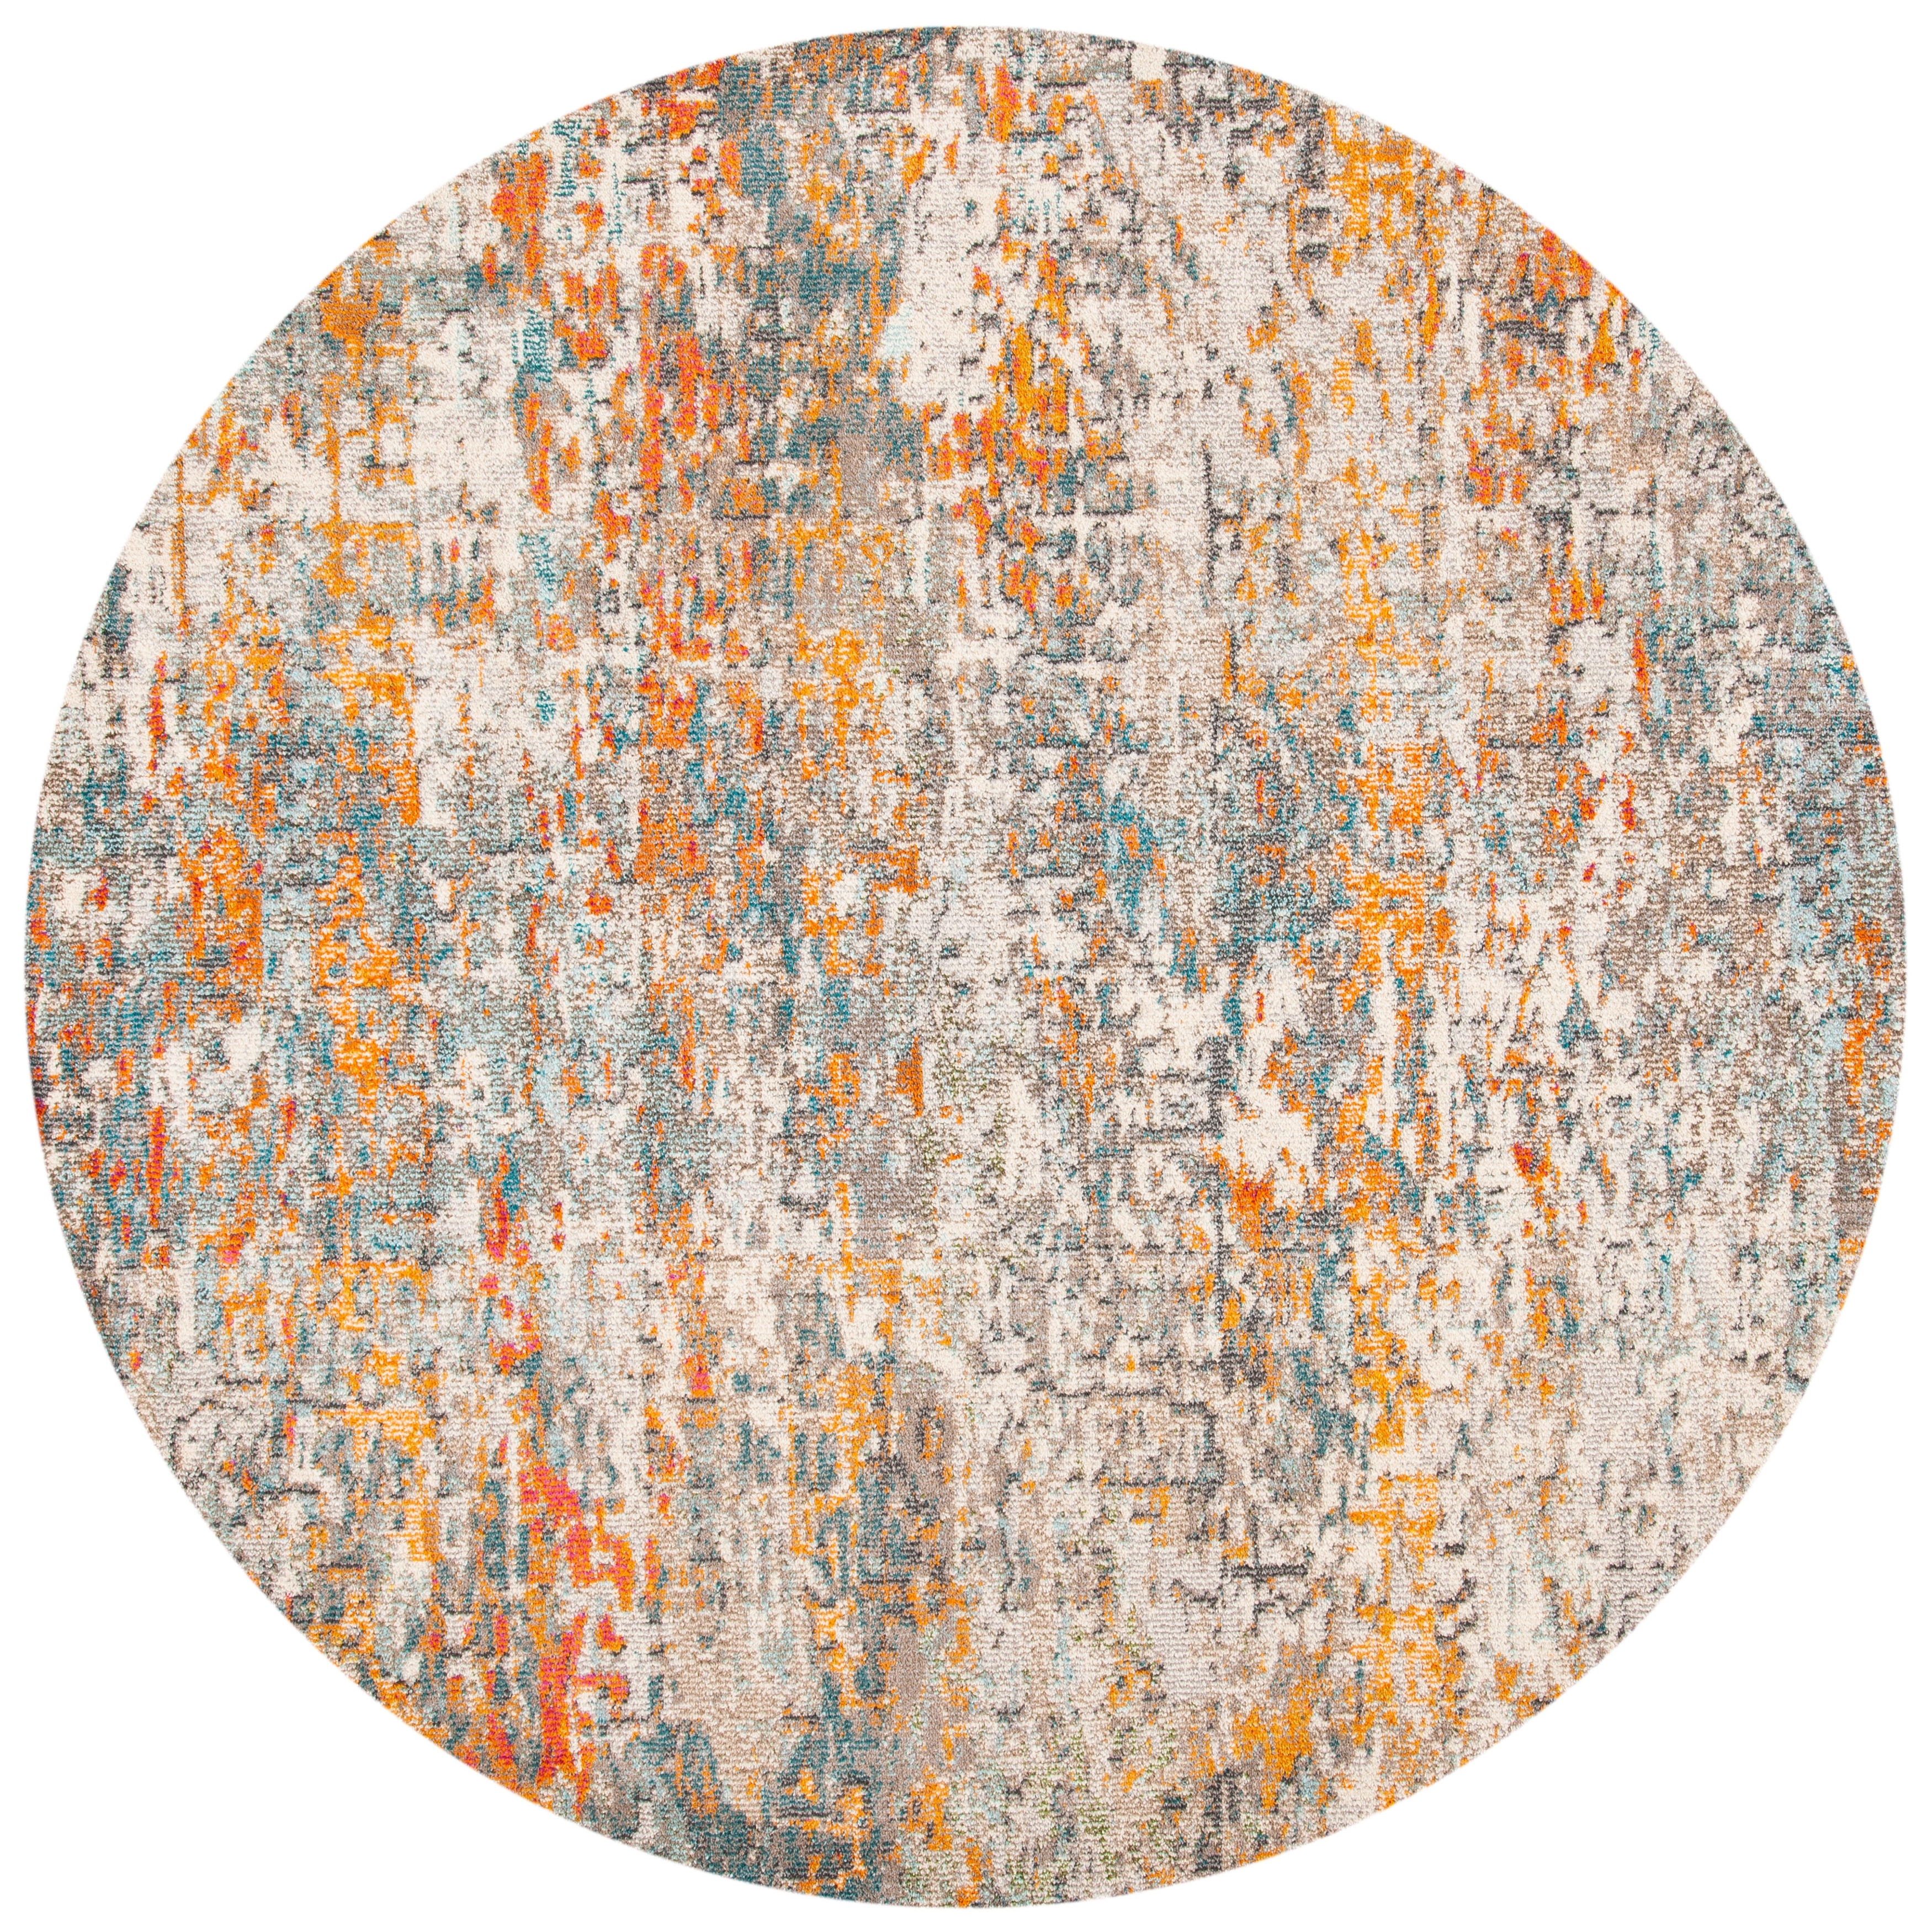 https://ak1.ostkcdn.com/images/products/is/images/direct/ddb934ca877477211a3014e19b0f2cd43136b628/SAFAVIEH-Madison-Loane-Modern-Abstract-Rug.jpg